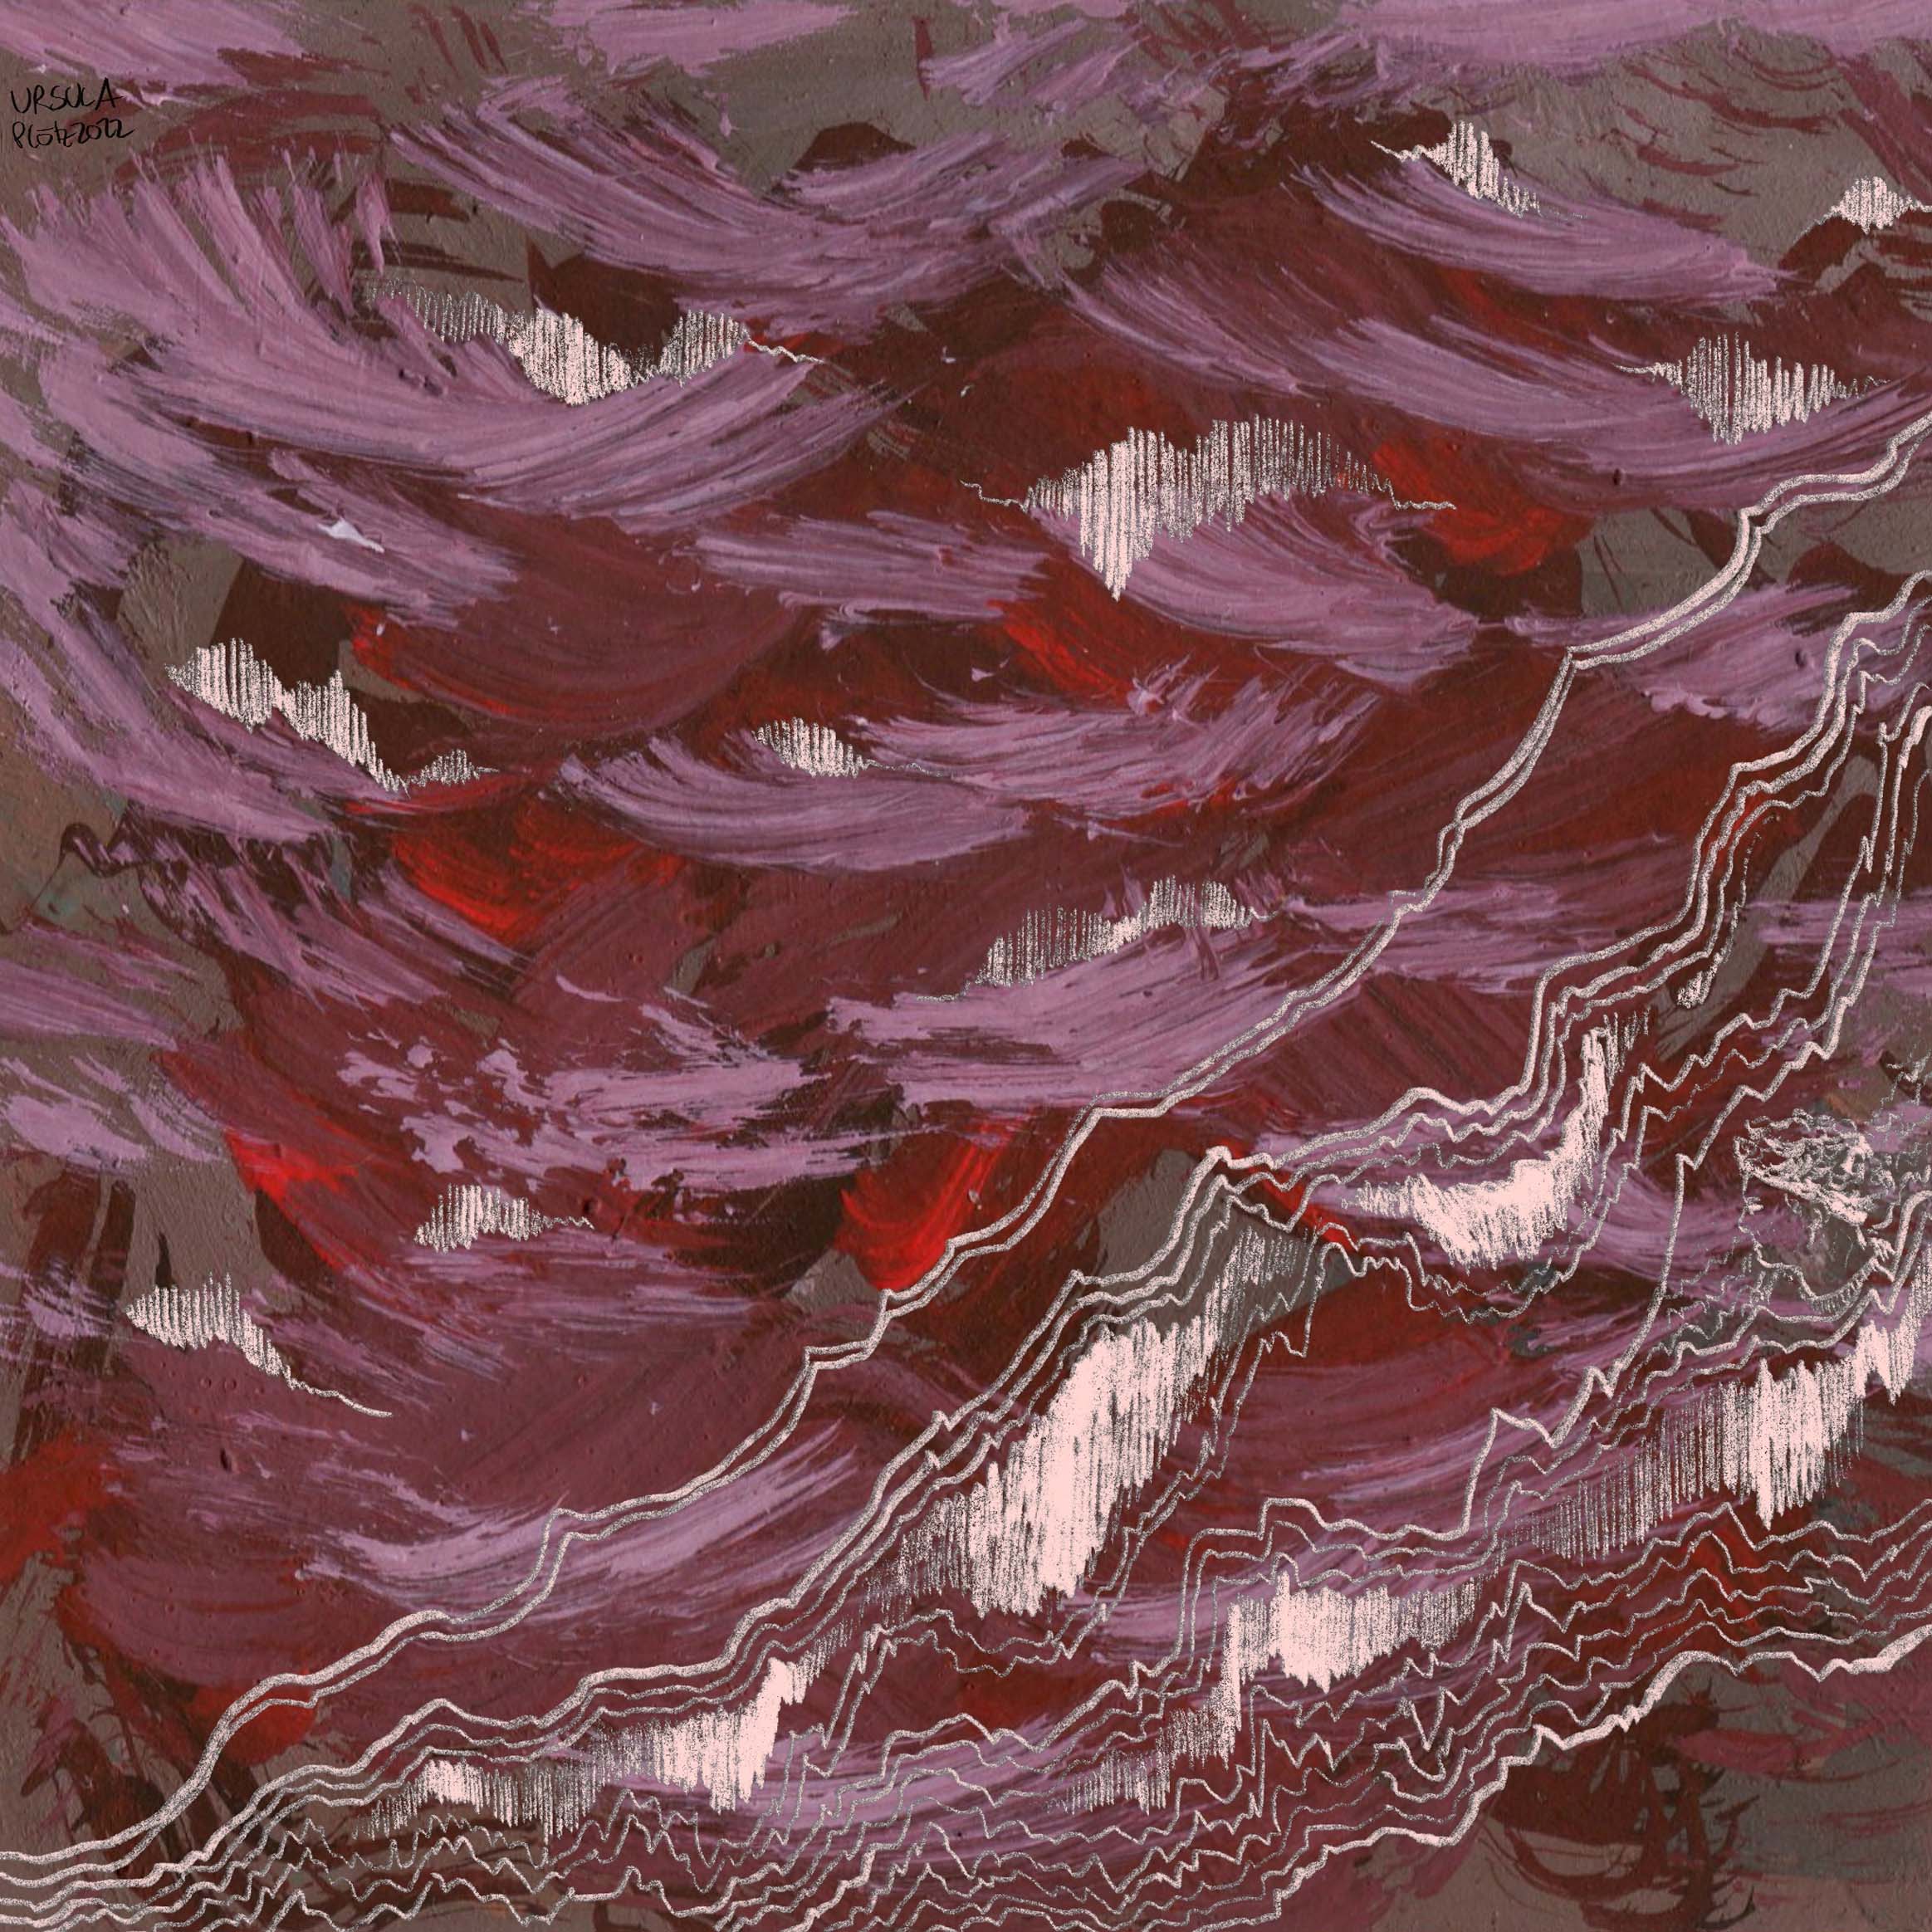 Brown background with red free form and berry waves (gouache) and light pink lines on it (digitally drawn)